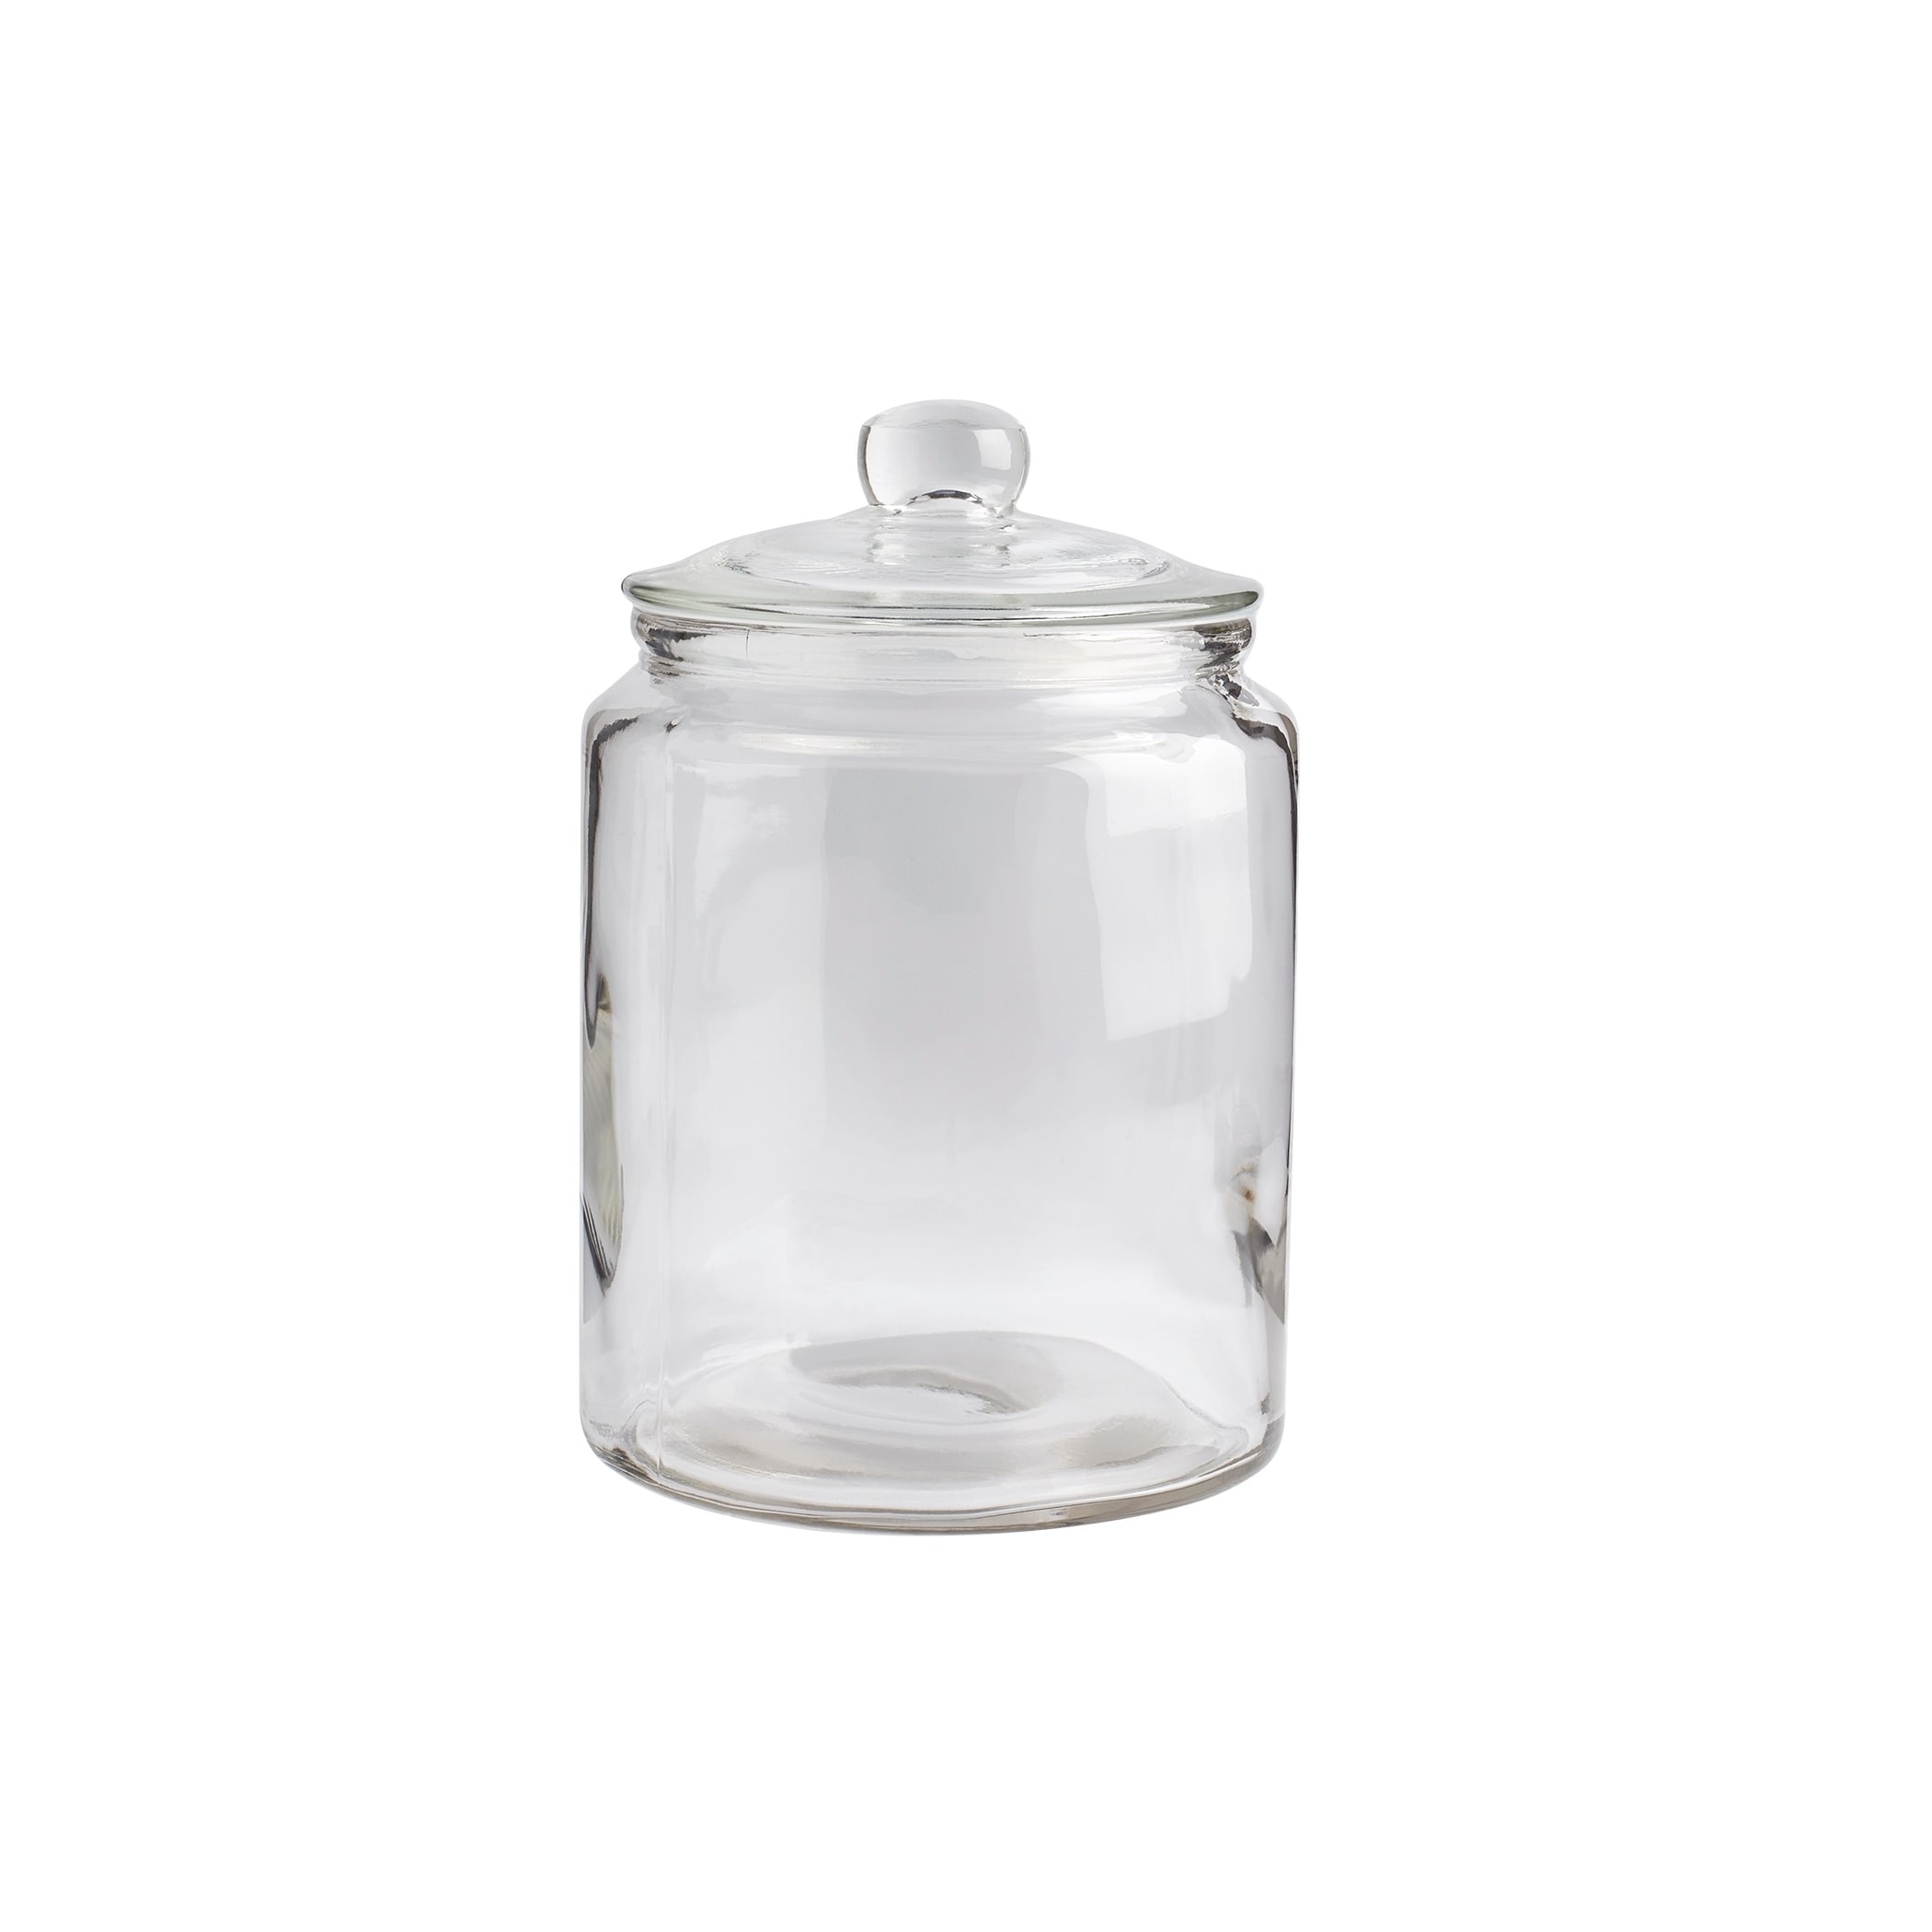 https://ak1.ostkcdn.com/images/products/is/images/direct/cc1aa7d07f7dab2e89bd375ff6a1908e7369ff0e/Mason-Craft-%26-More-Apothecary-Clear-Glass-Jars-w--Glass-Lids---Set-of-2.jpg